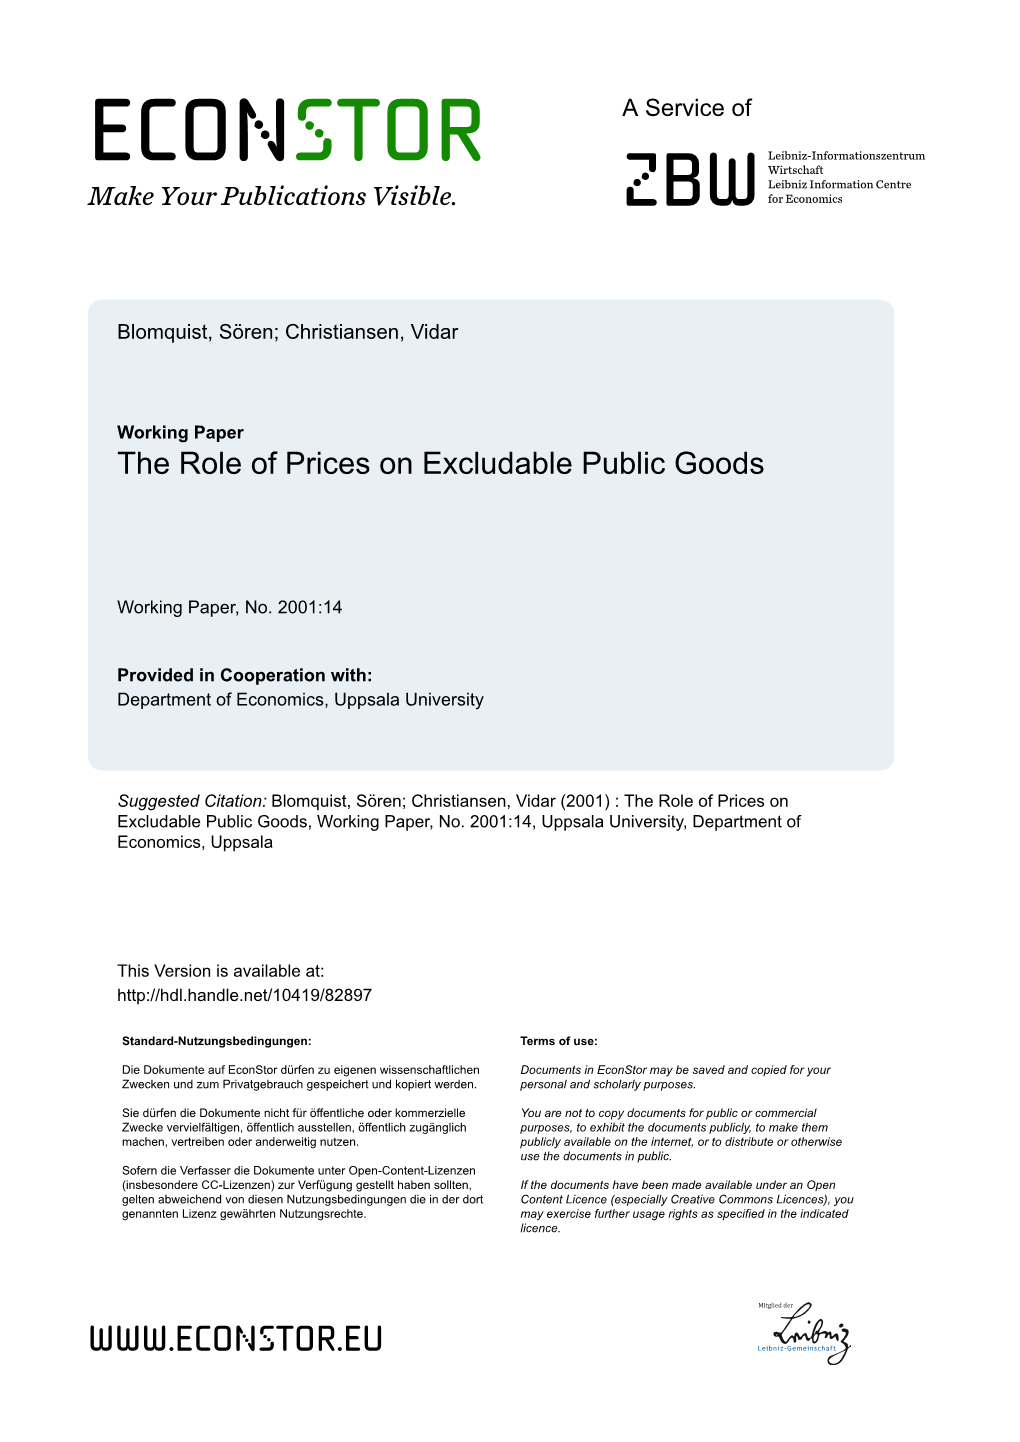 The Role of Prices on Excludable Public Goods